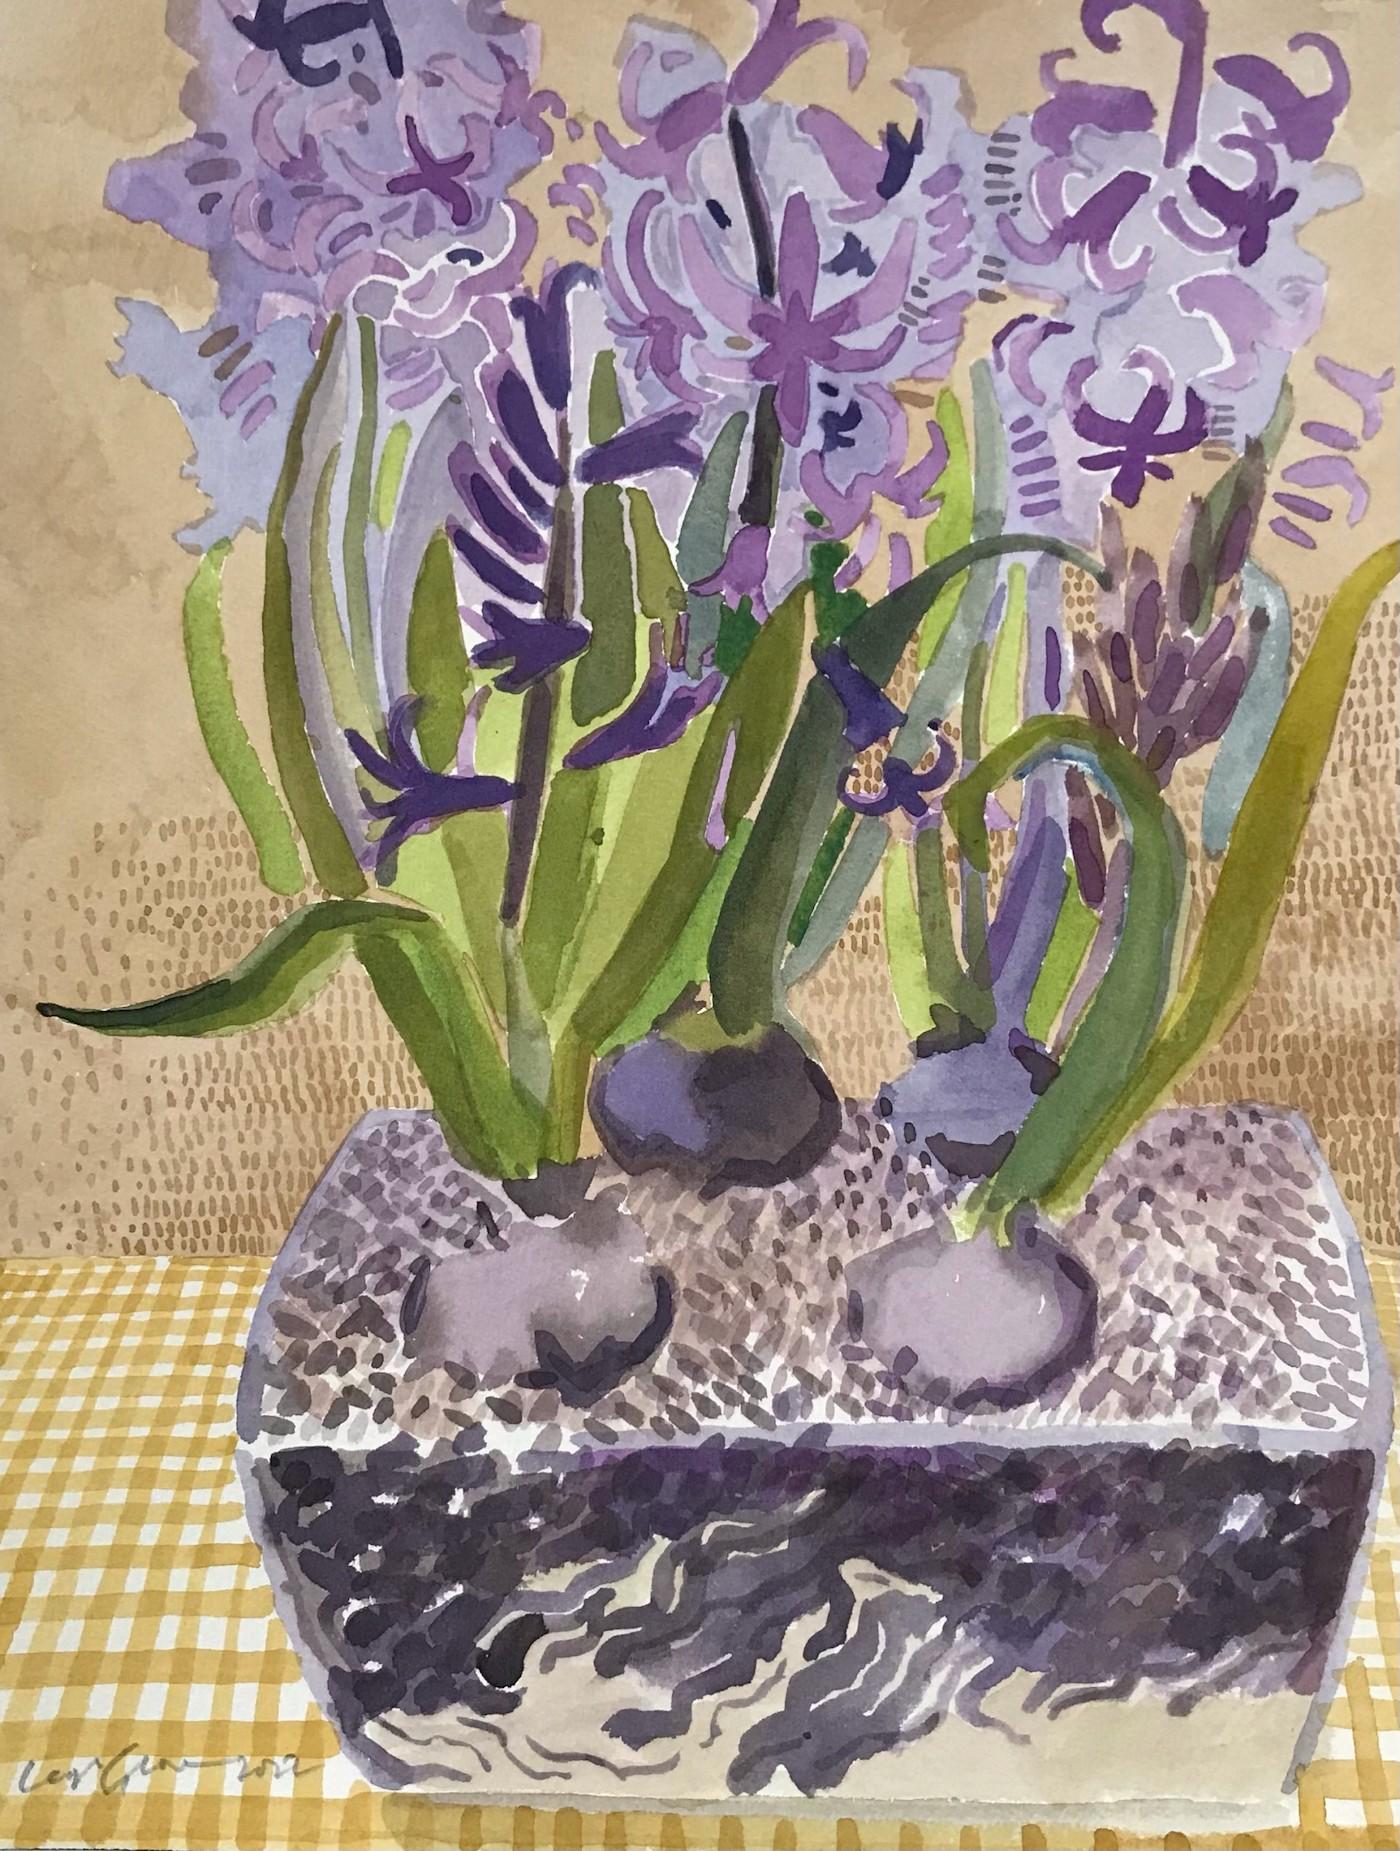 Hyacinth in glass vase by Leigh Glover [2022]
original and hand signed by the artist 
Watercolour on Paper
Image size: H:31 cm x W:23 cm
Complete Size of Unframed Work: H:31 cm x W:23 cm x D:0.1cm
Sold Unframed
Please note that insitu images are